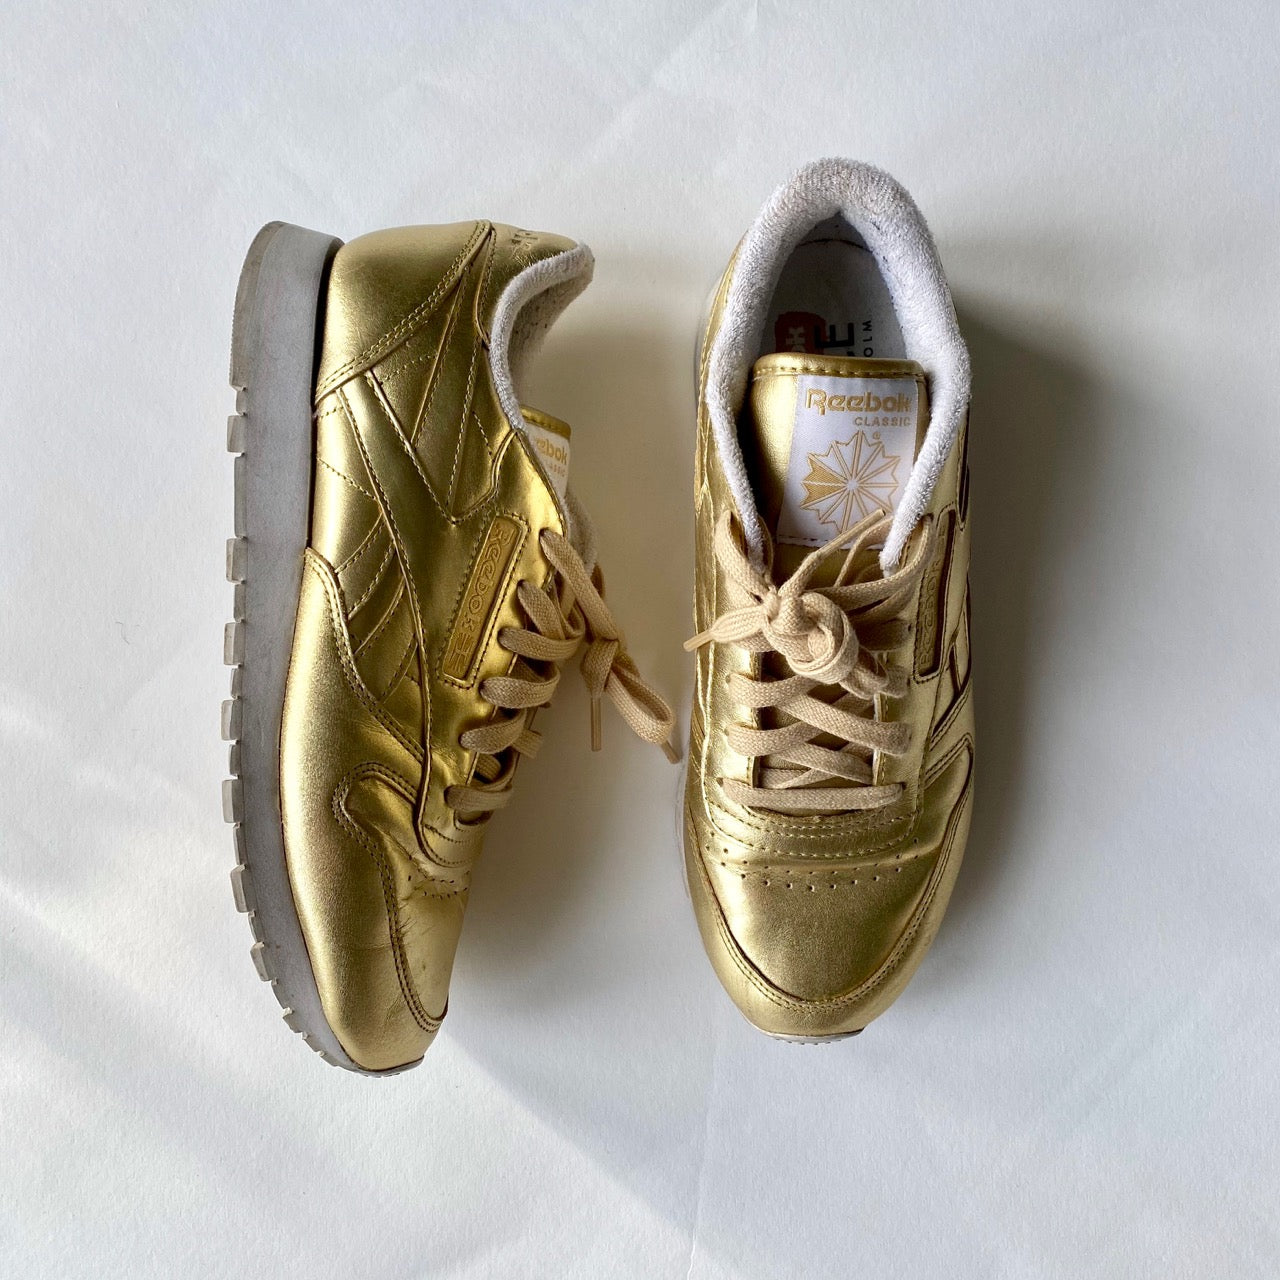 Manifesto Woman Reebok x Face Stockholm gold leather trainers